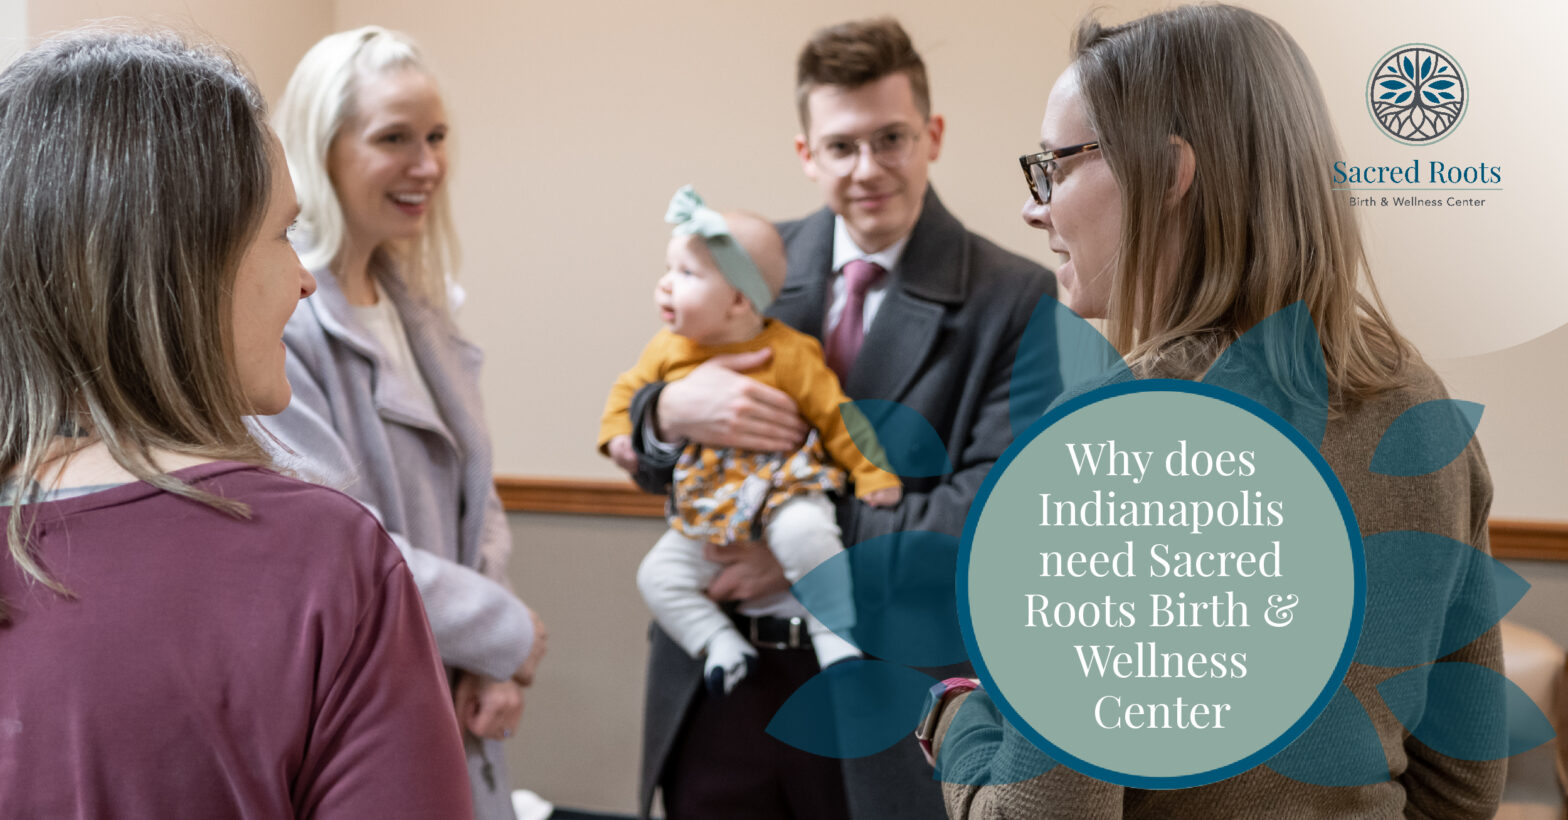 Why does Indianapolis need Sacred Roots Birth & Wellness Center